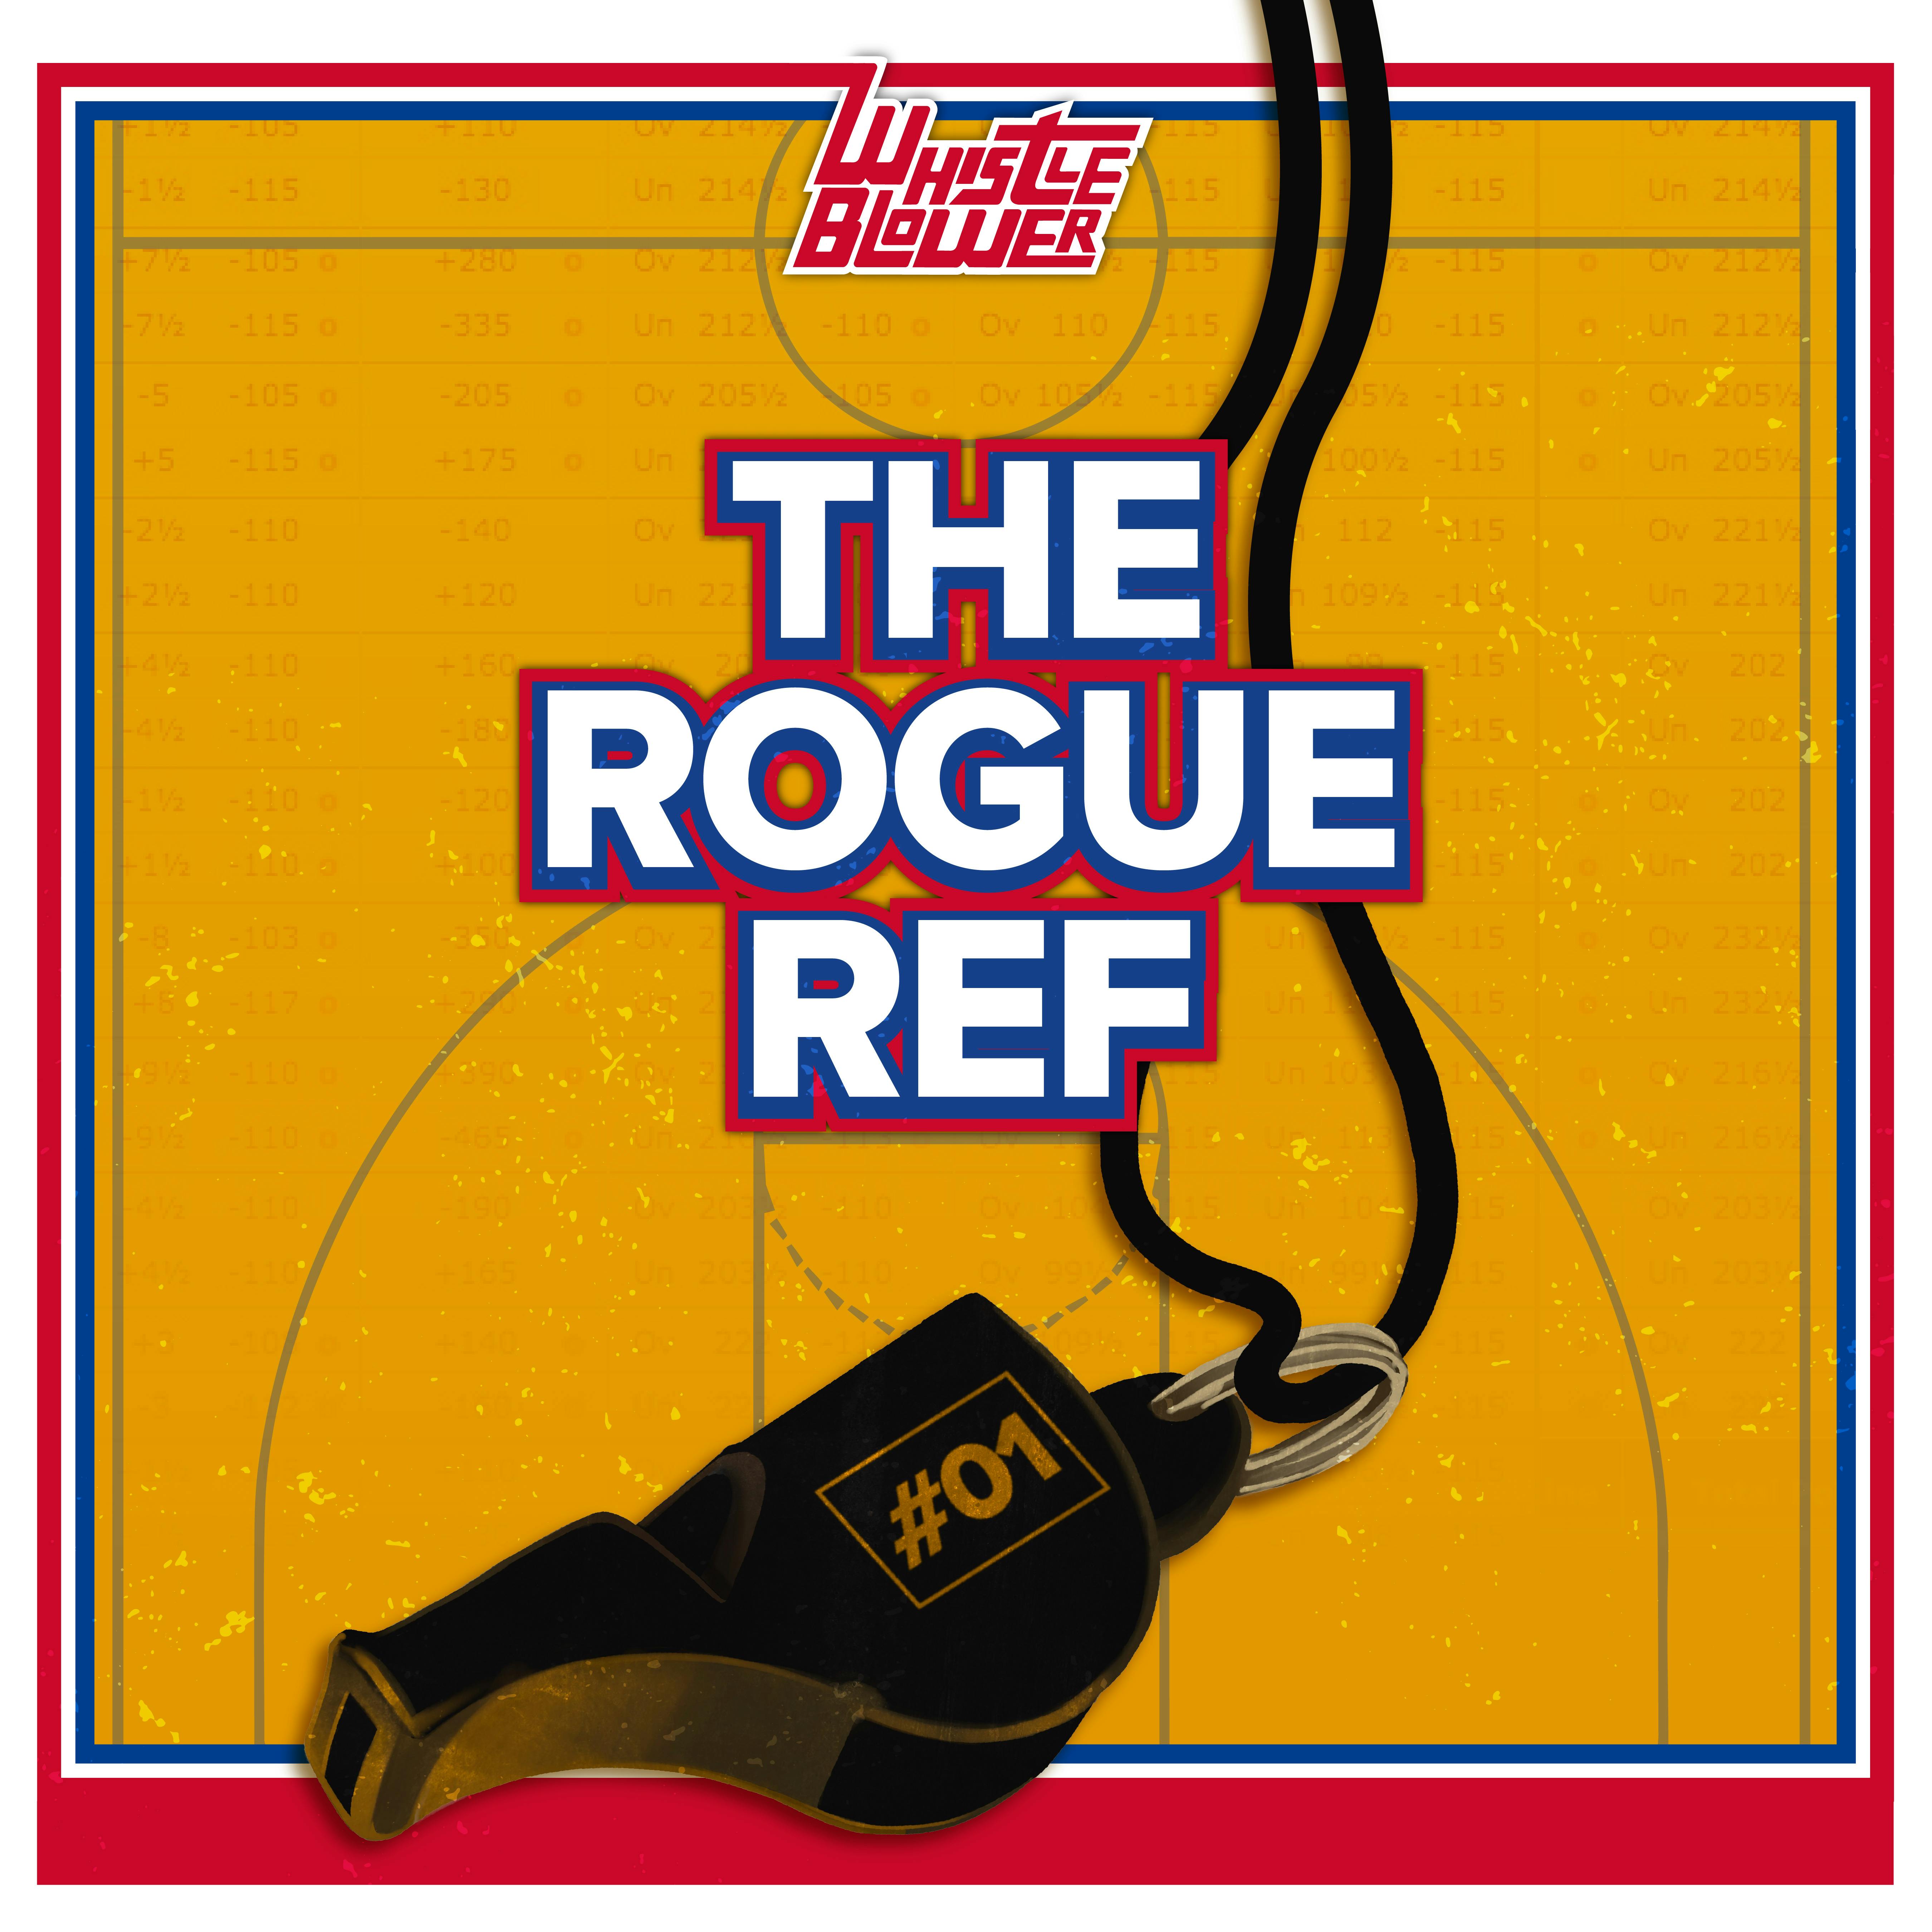 The Rogue Ref